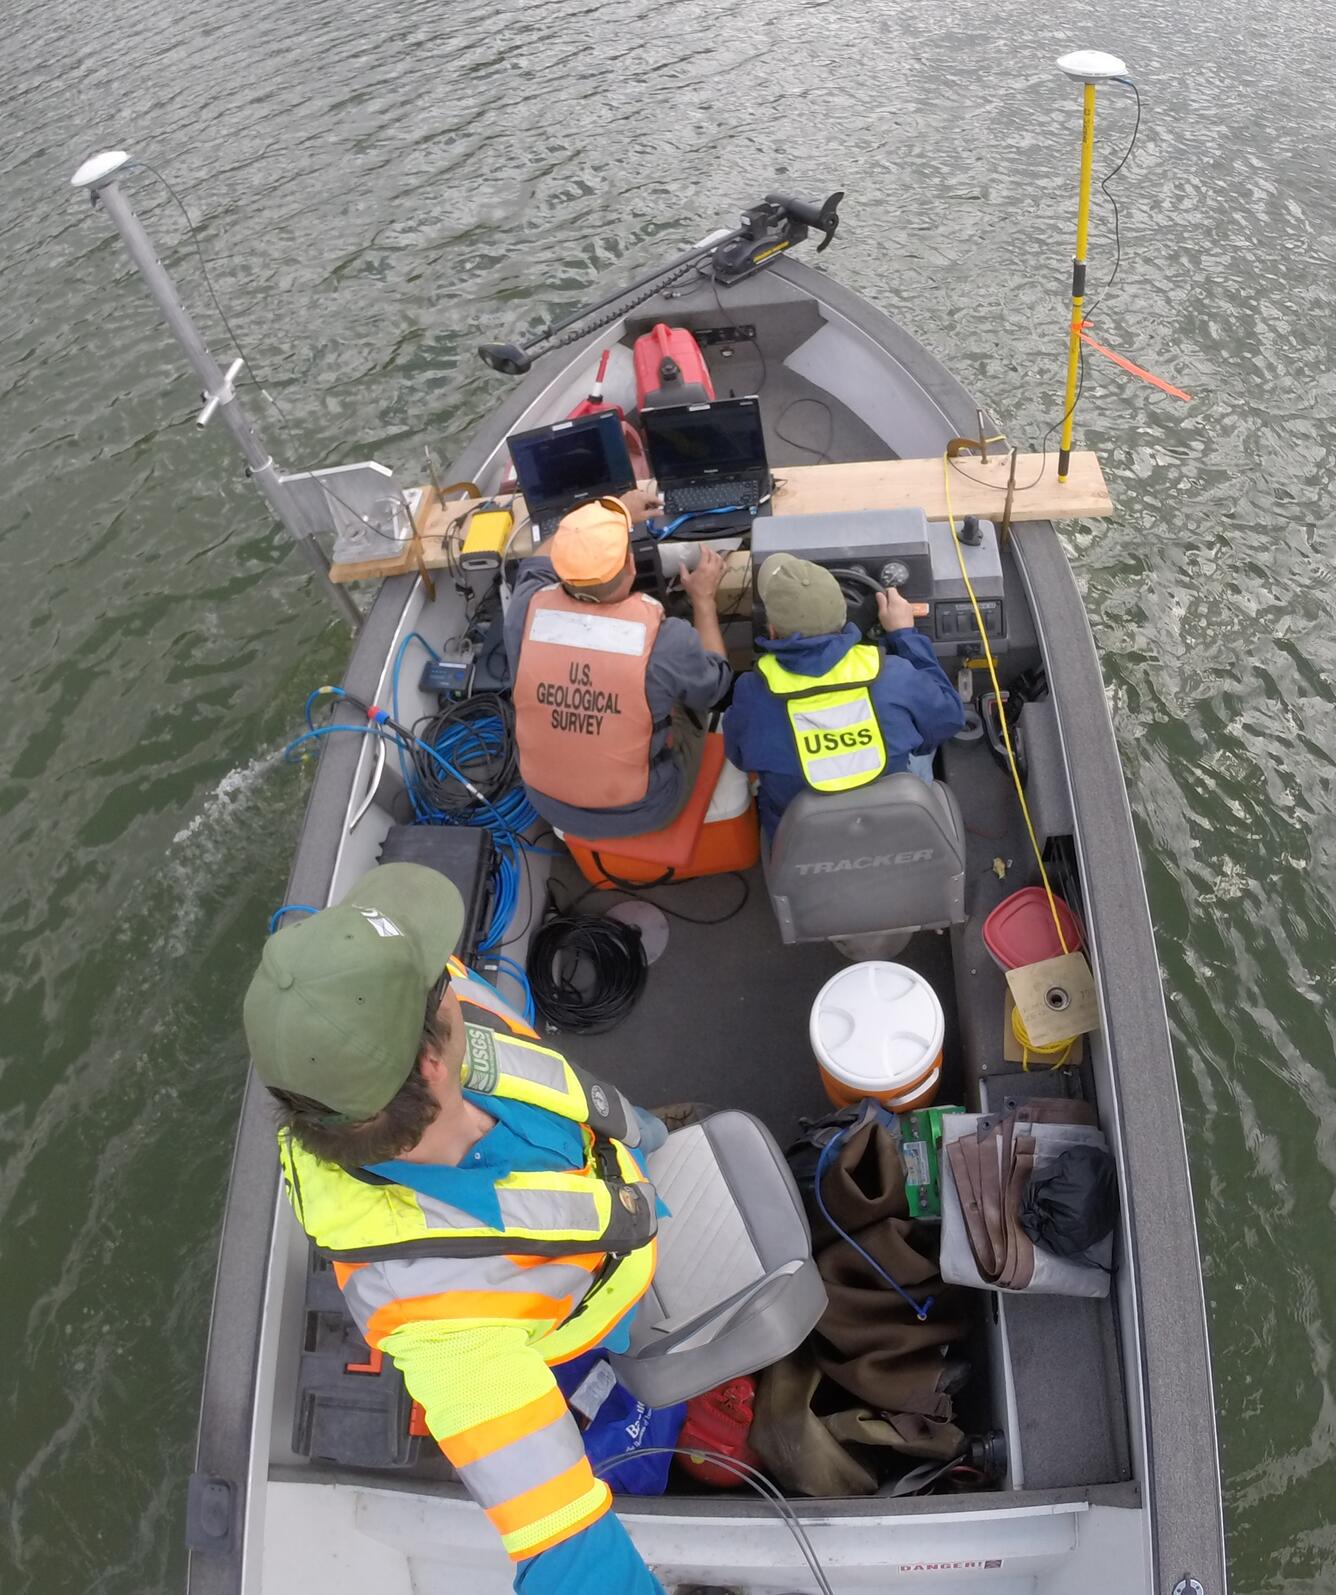 USGS personnel collecting bathymetry data.